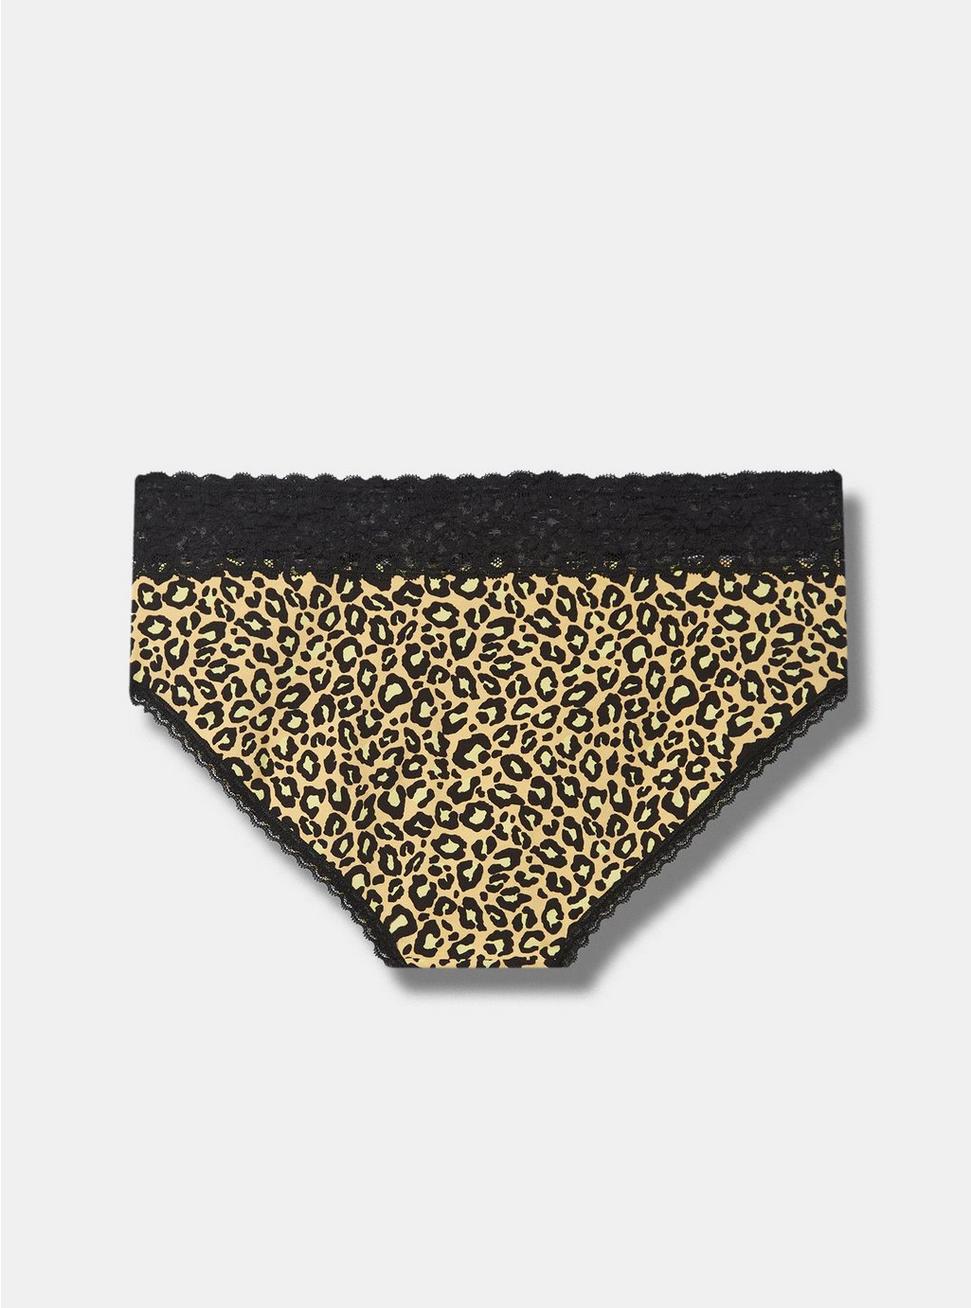 Cotton Mid-Rise Hipster Lace Trim Panty, MONDAY LEOPARD YELLOW, alternate